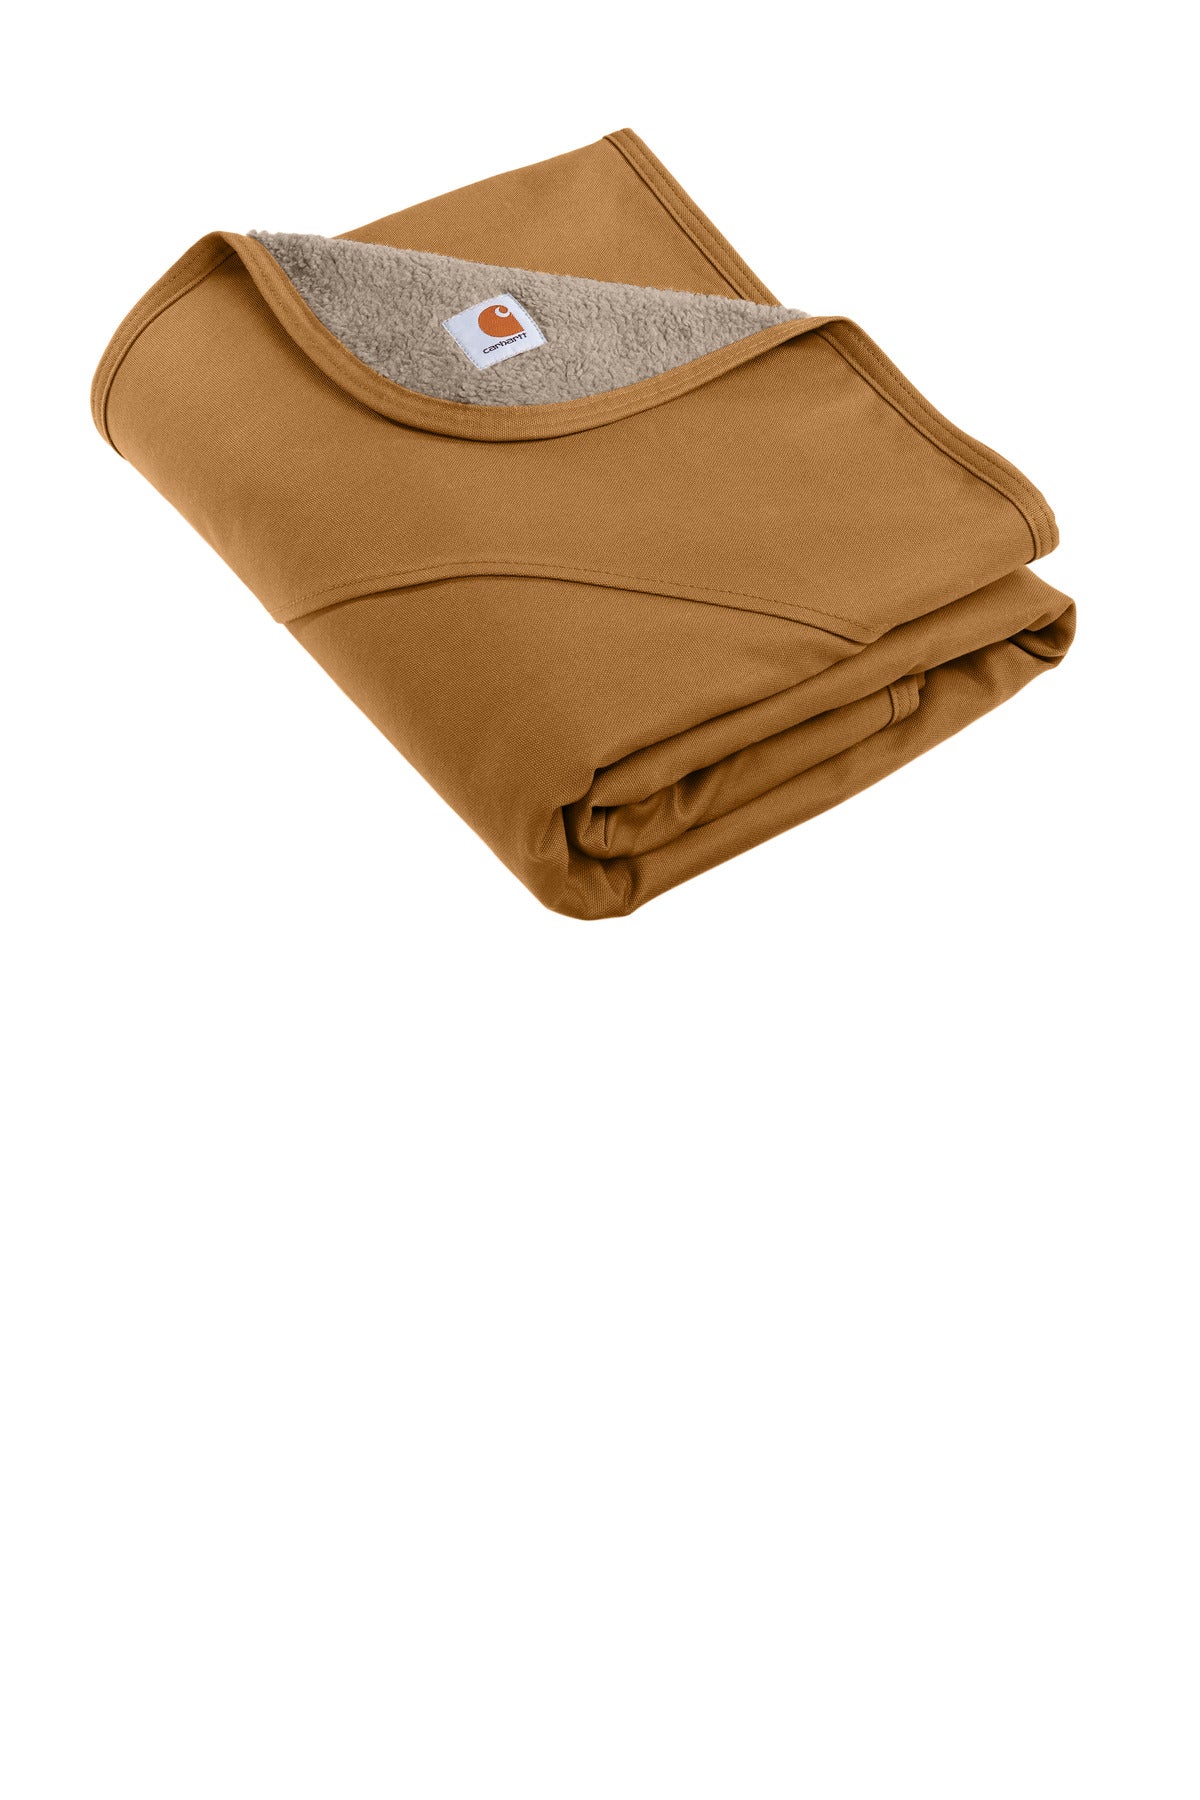 Carhartt Firm Duck Sherpa-Lined Blanket CTP0000502